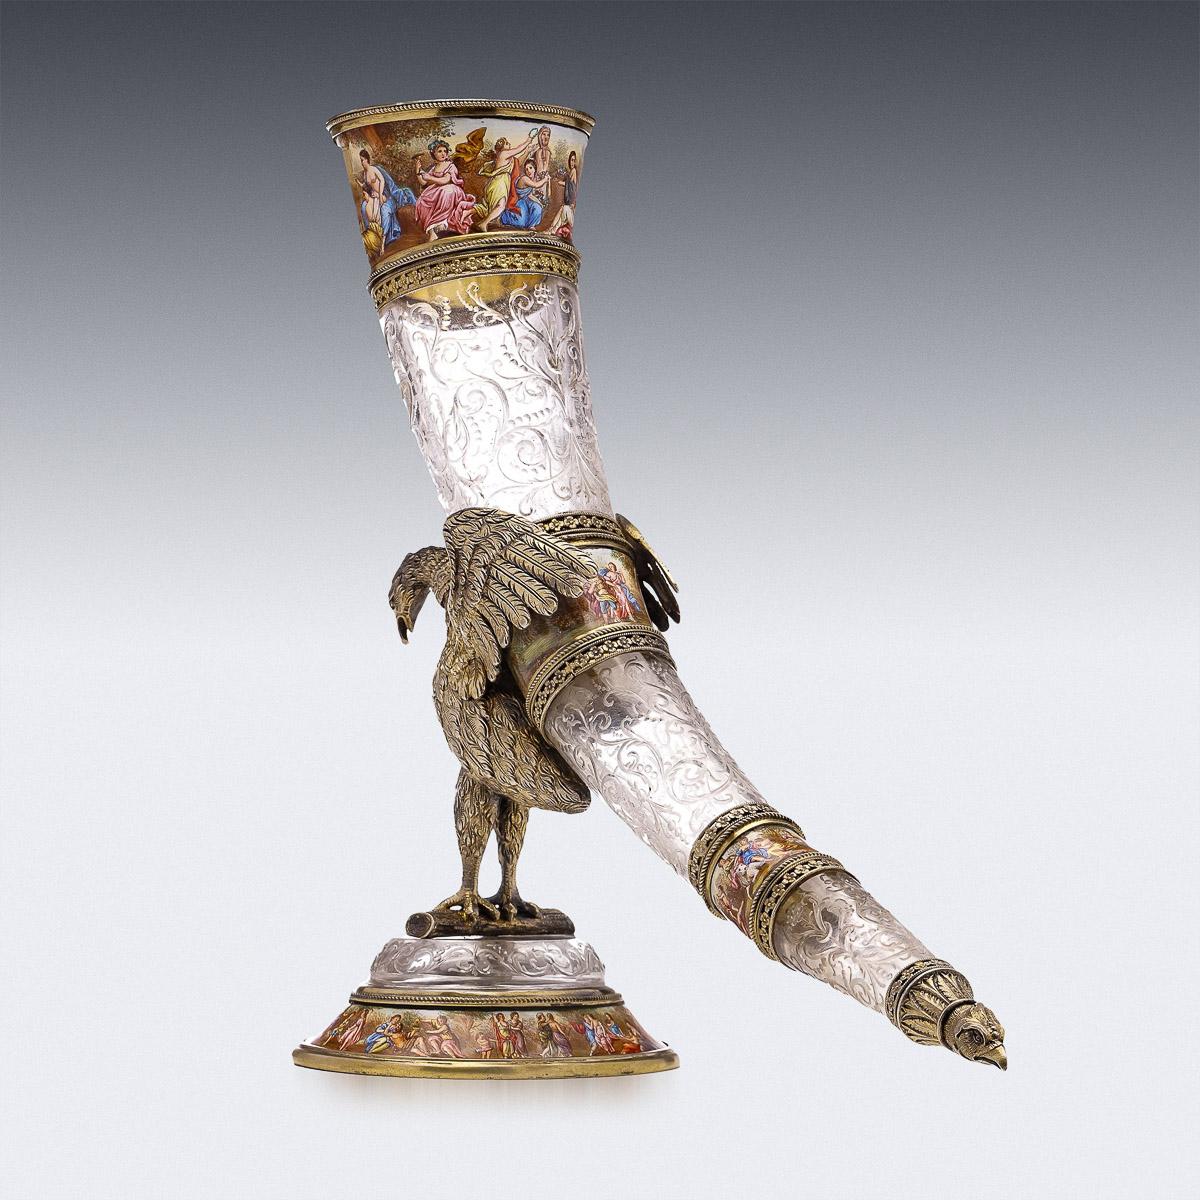 Antique 19th Century Austrian exceptionally rare solid silver gilt, enamel and rock crystal drinking horn, by Hermann Ratzersdorfer, Vienna, circa 1880s. The drinking horn is made of rock crystal is supported on the back of a spread-winged pelican,